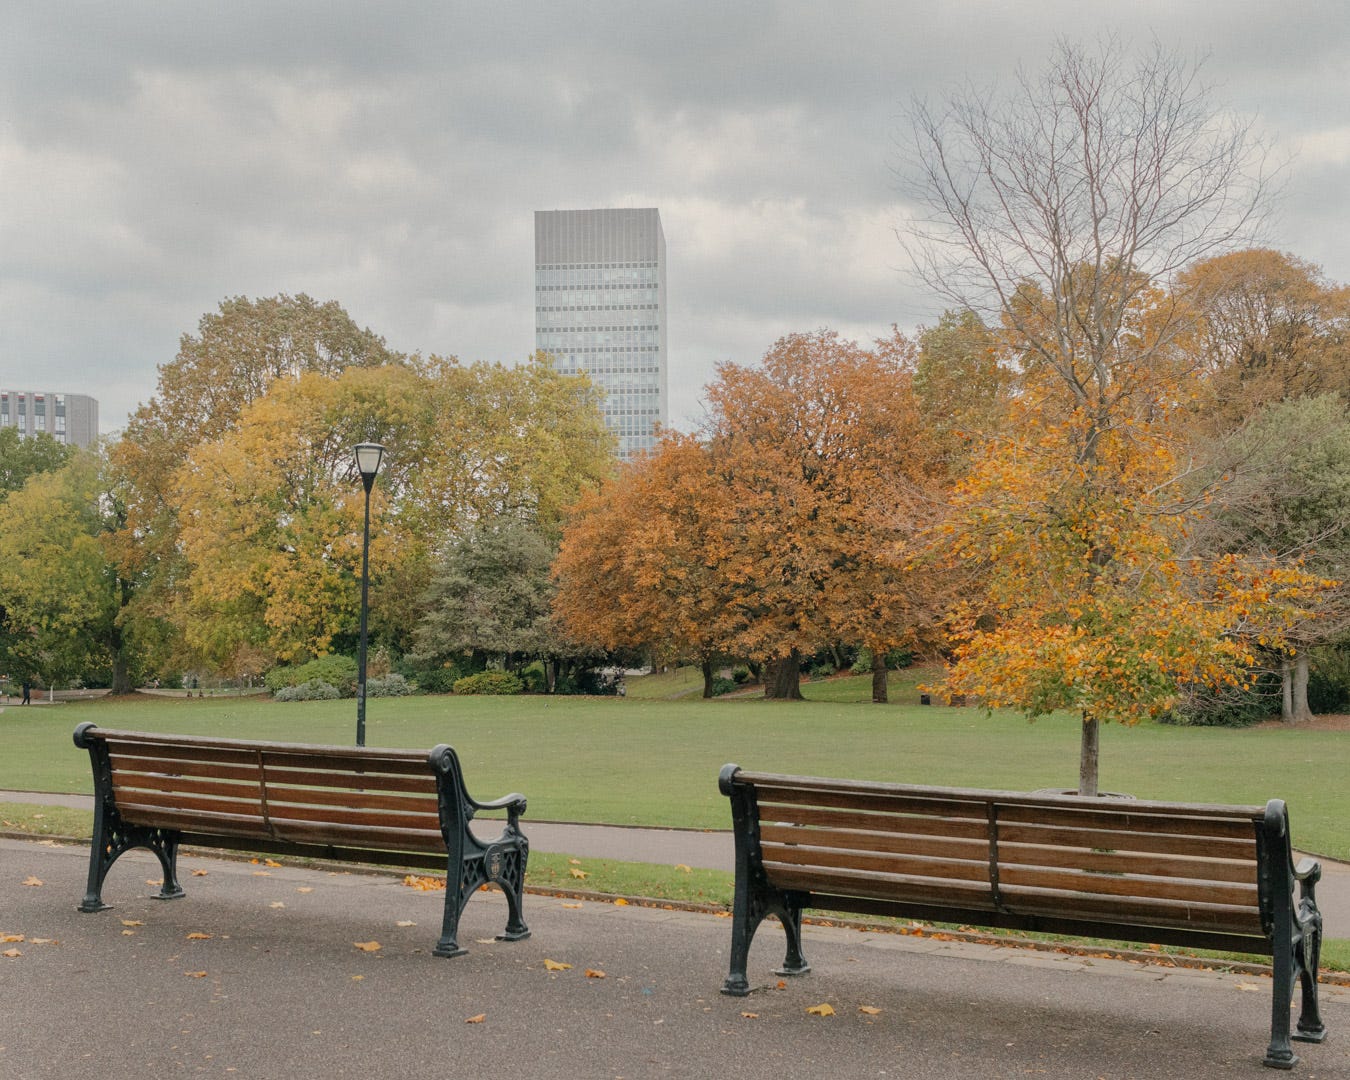 Two benches in Weston Park with the Arts Tower in the background